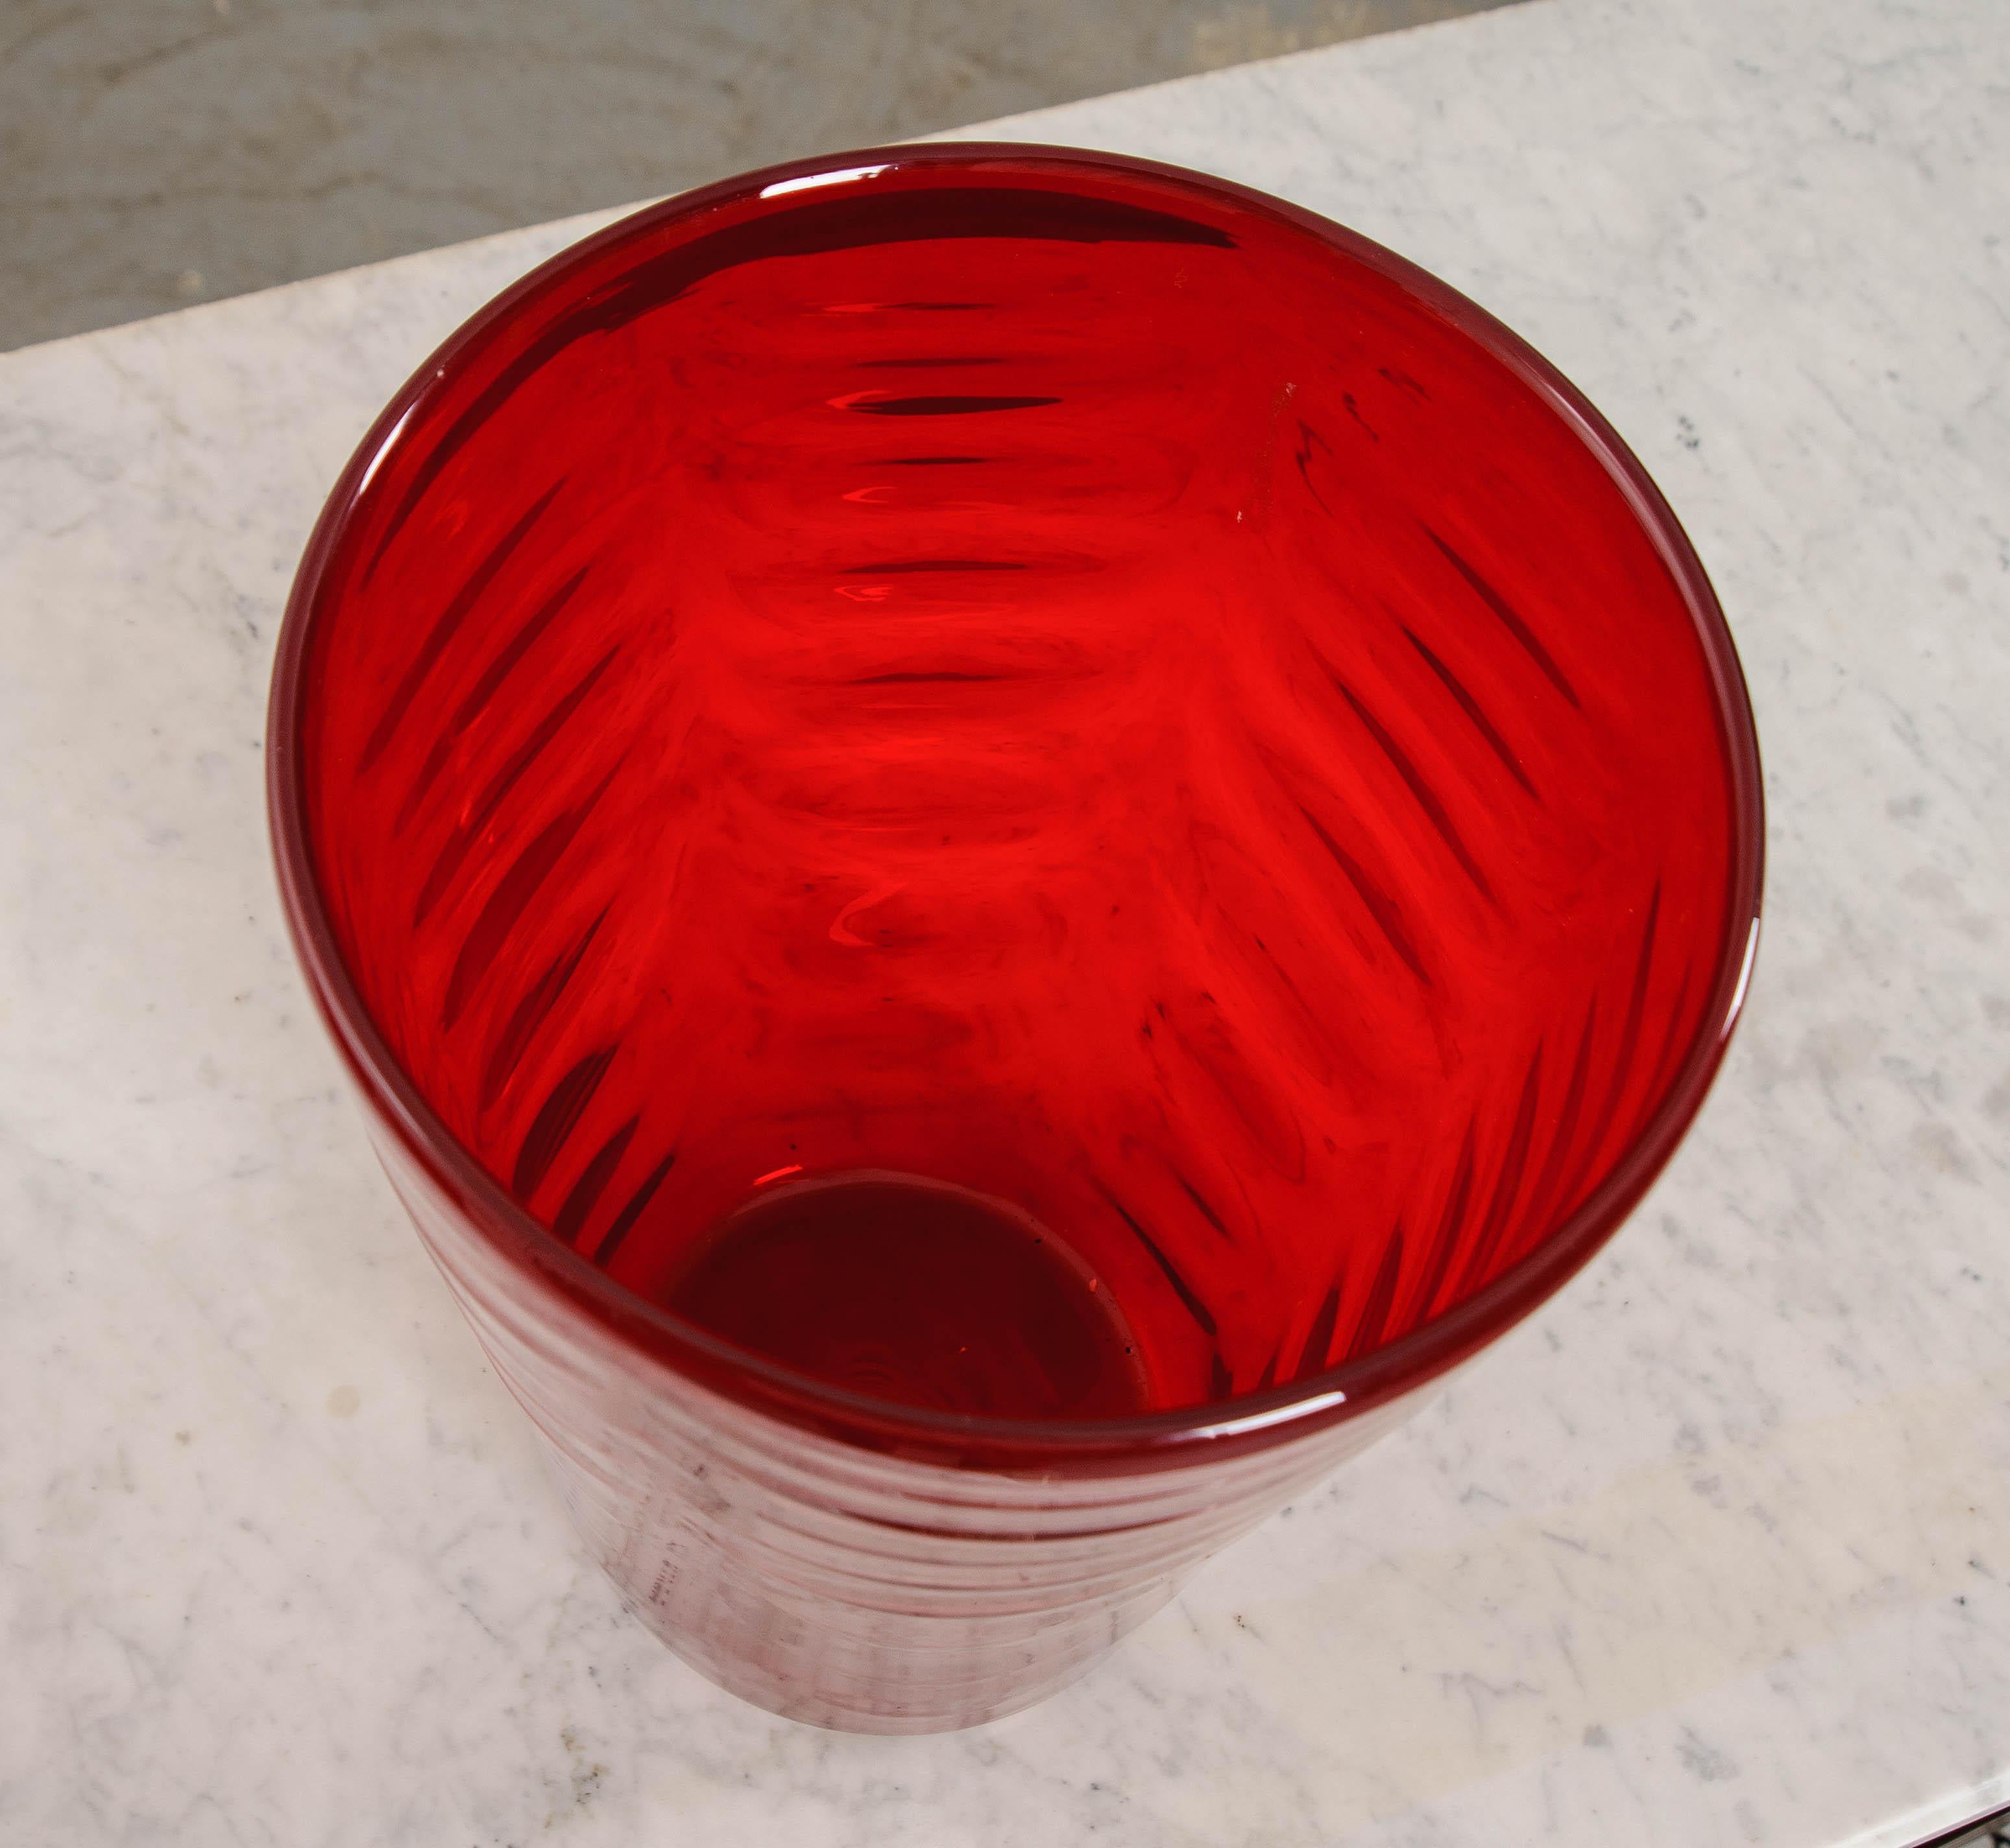 Other English Early 20th Century Red Glass Vases For Sale